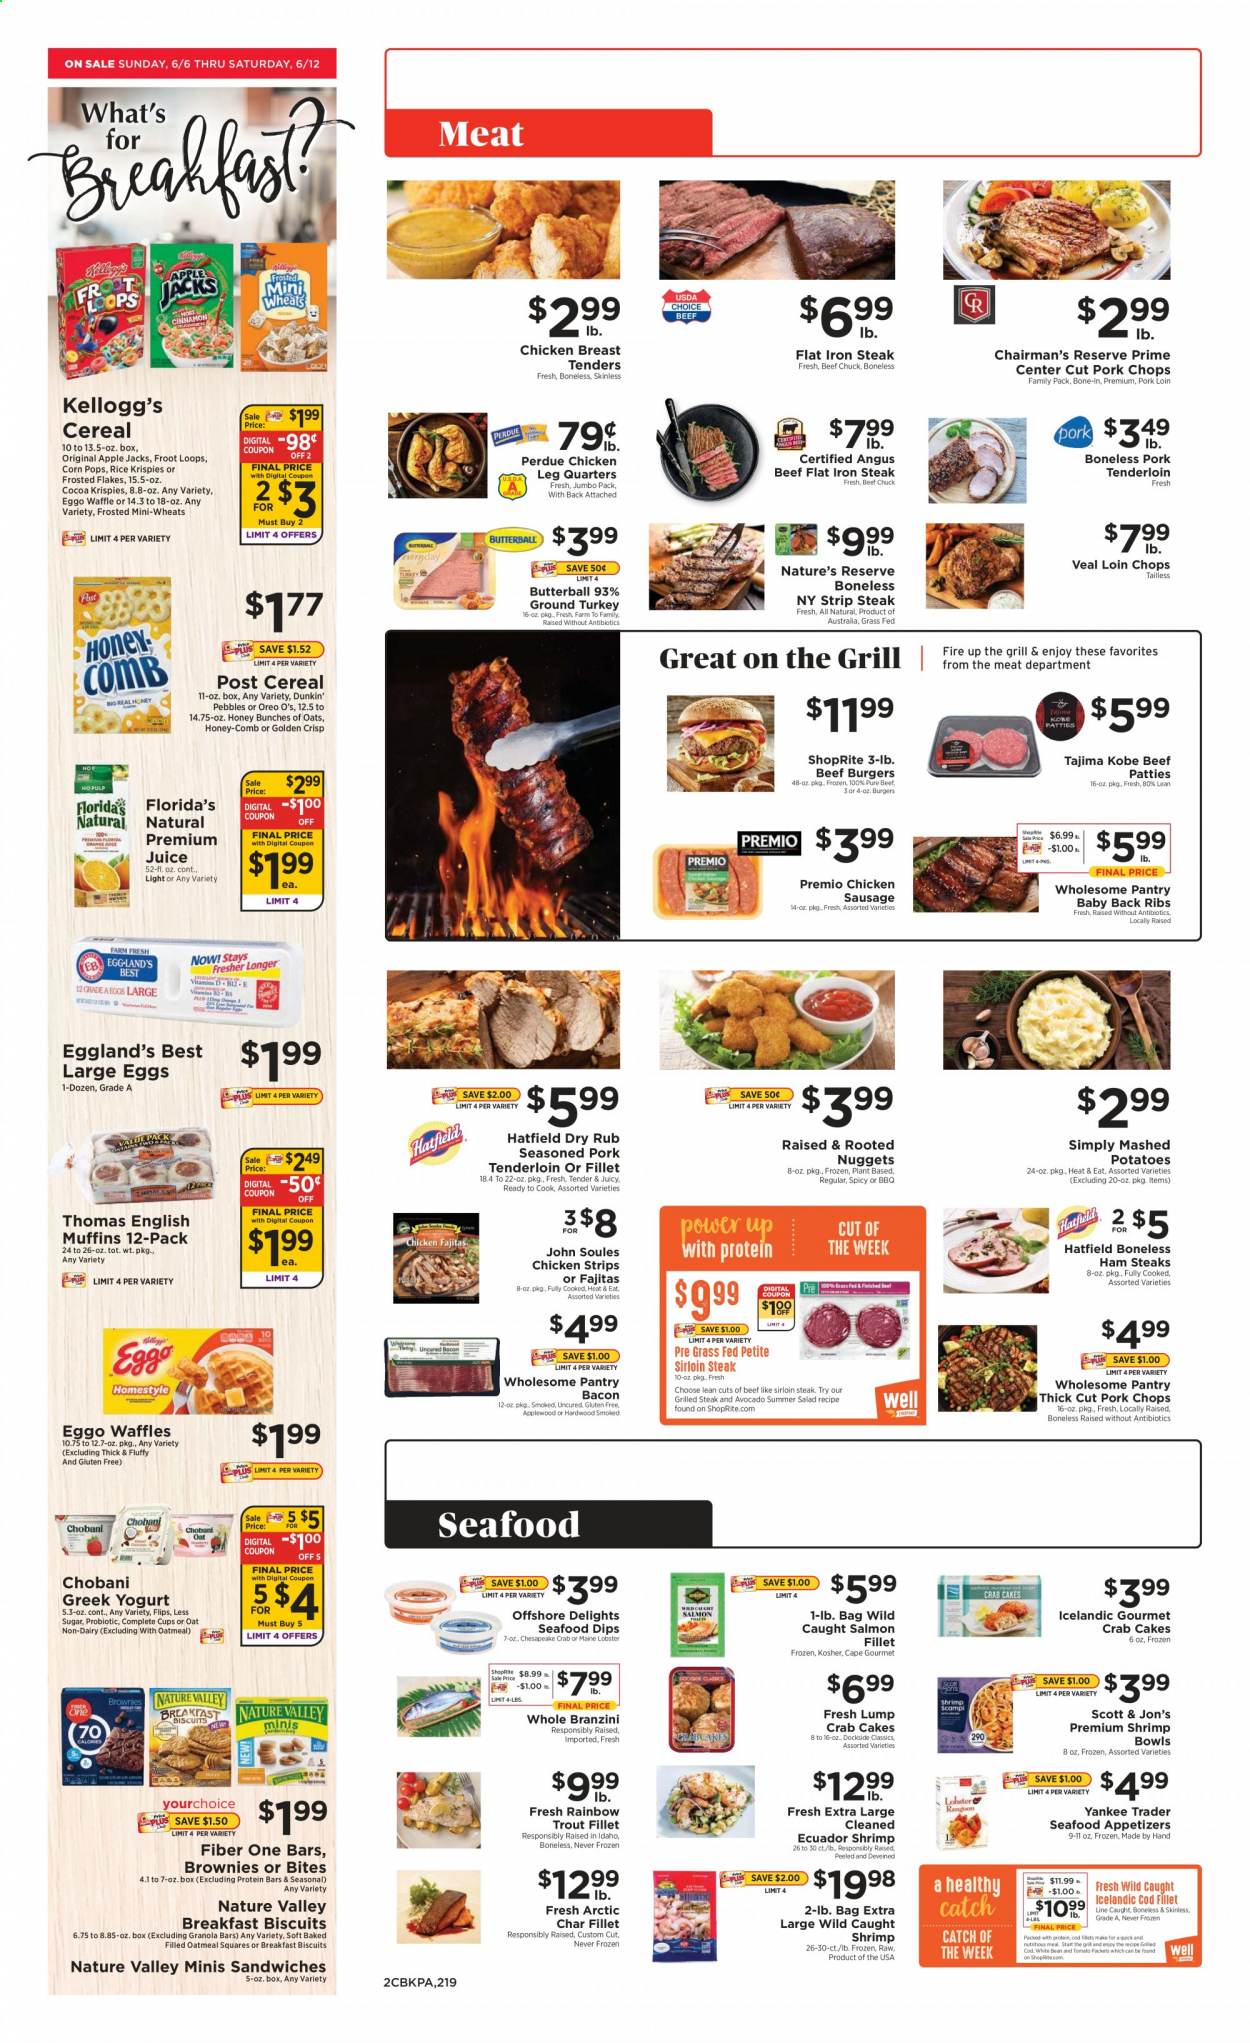 thumbnail - ShopRite Flyer - 06/06/2021 - 06/12/2021 - Sales products - brownies, cod, lobster, salmon, salmon fillet, trout, seafood, shrimps, crab cake, mashed potatoes, sandwich, nuggets, hamburger, fajita, beef burger, Perdue®, bacon, Butterball, ham, sausage, chicken sausage, ham steaks, greek yoghurt, Oreo, yoghurt, Chobani, large eggs, strips, chicken strips, Kellogg's, biscuit, Florida's Natural, cocoa, oatmeal, cereals, protein bar, granola bar, Rice Krispies, Frosted Flakes, Corn Pops, Nature Valley, Fiber One, juice, ground turkey, chicken legs, chicken tenders, beef meat, beef sirloin, steak, sirloin steak, striploin steak, top blade, pork chops, pork loin, pork meat, pork ribs, pork tenderloin, pork back ribs, comb, bunches. Page 4.